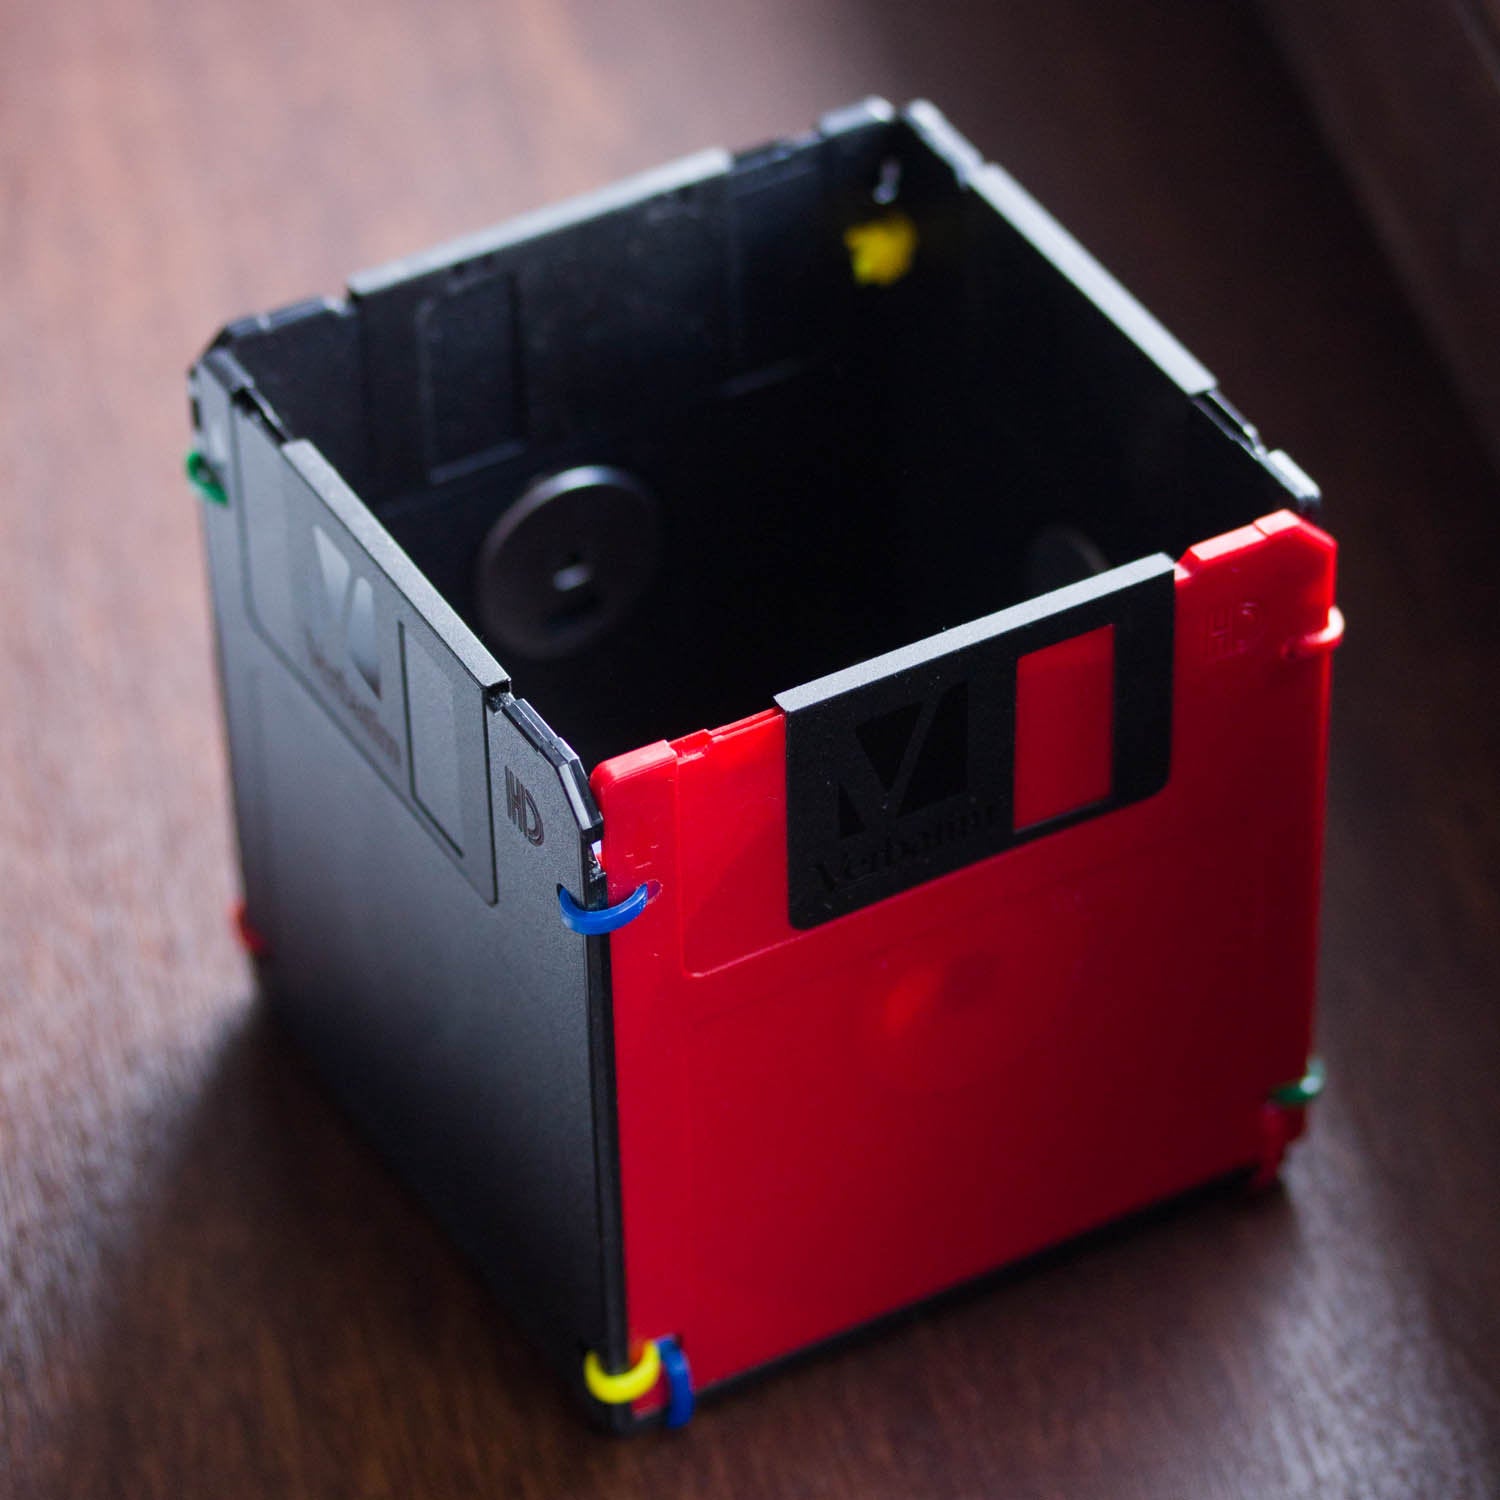 Pen and Pencil cup made with floppy disks - red